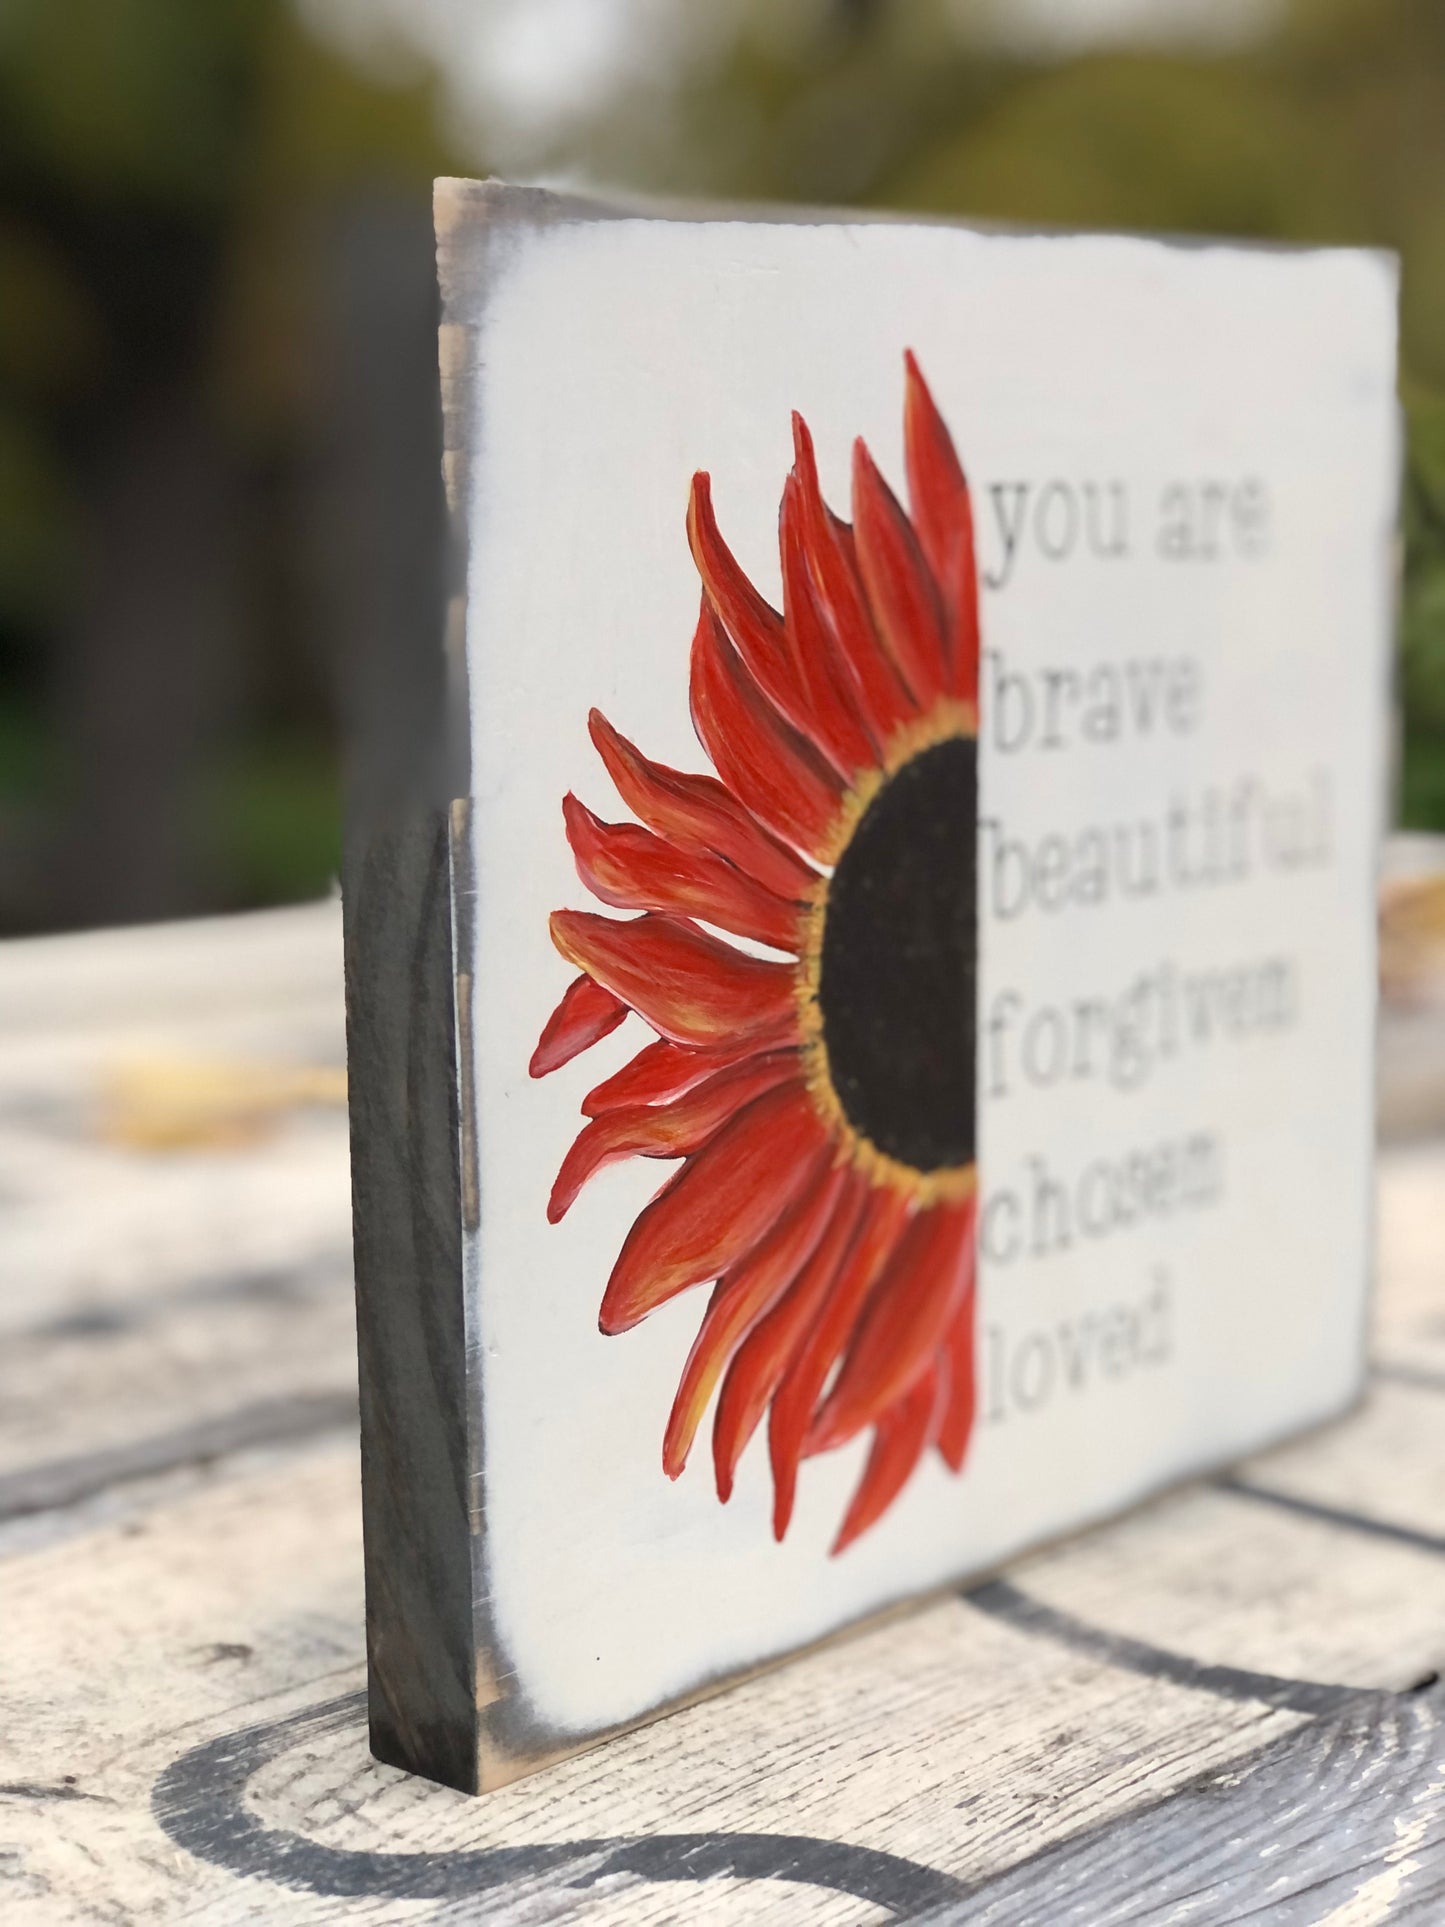 HAND-PAINTED SUNFLOWER YOU ARE BRAVE, BEAUTIFUL, FORGIVEN, CHOSEN, LOVED WOOD SIGN